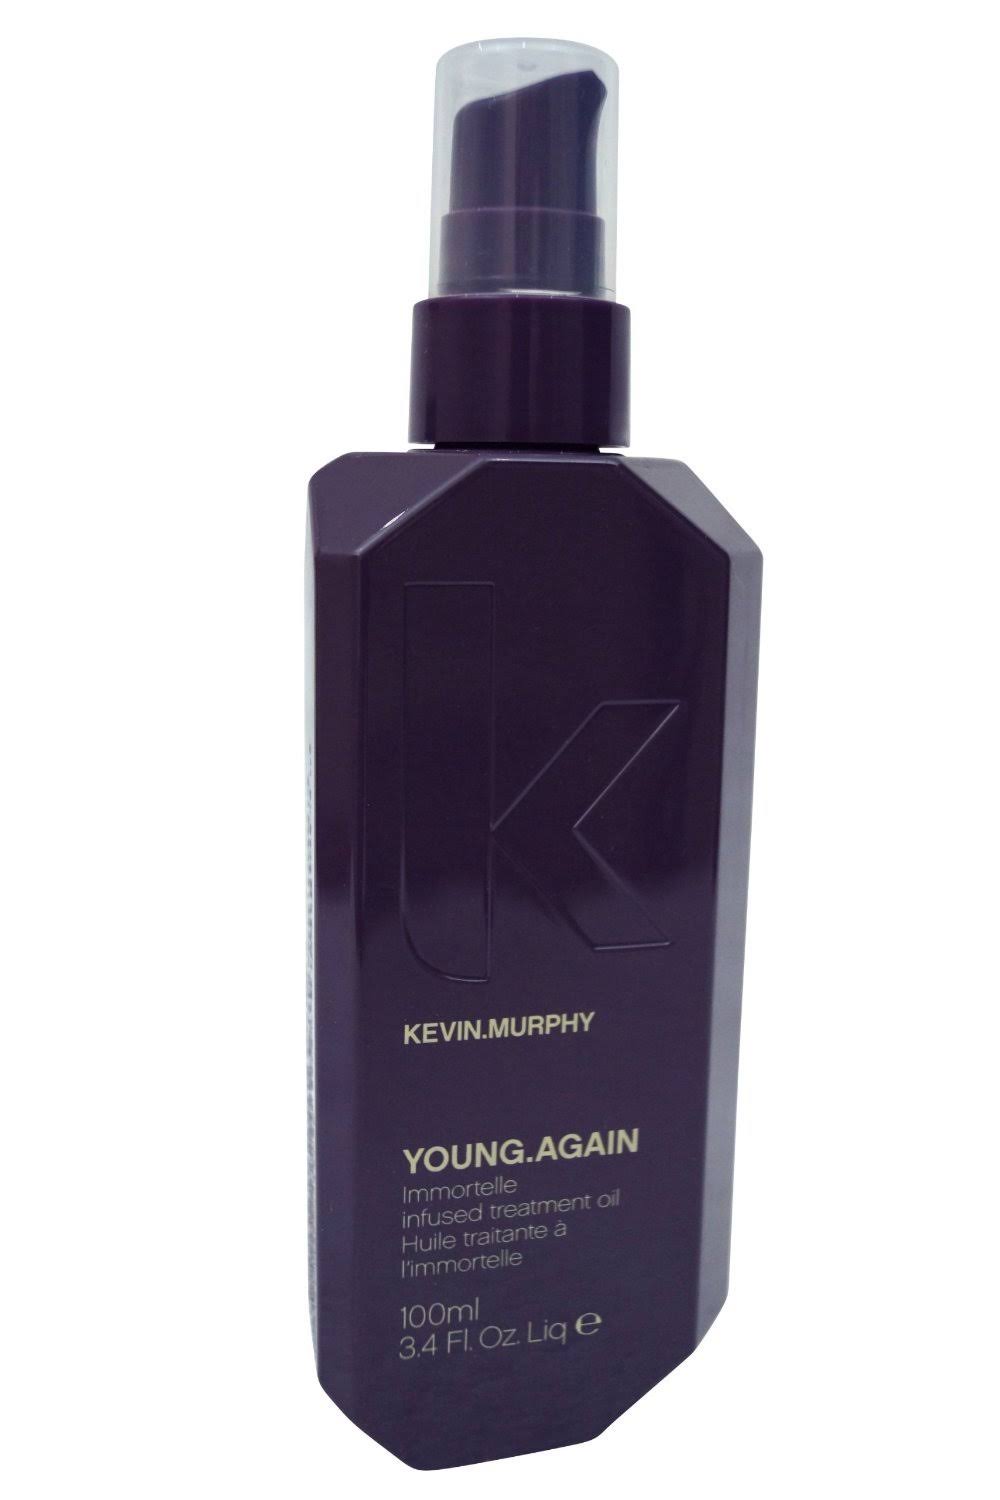 Young.Again Anti-aging Leave-in Treatment Oil